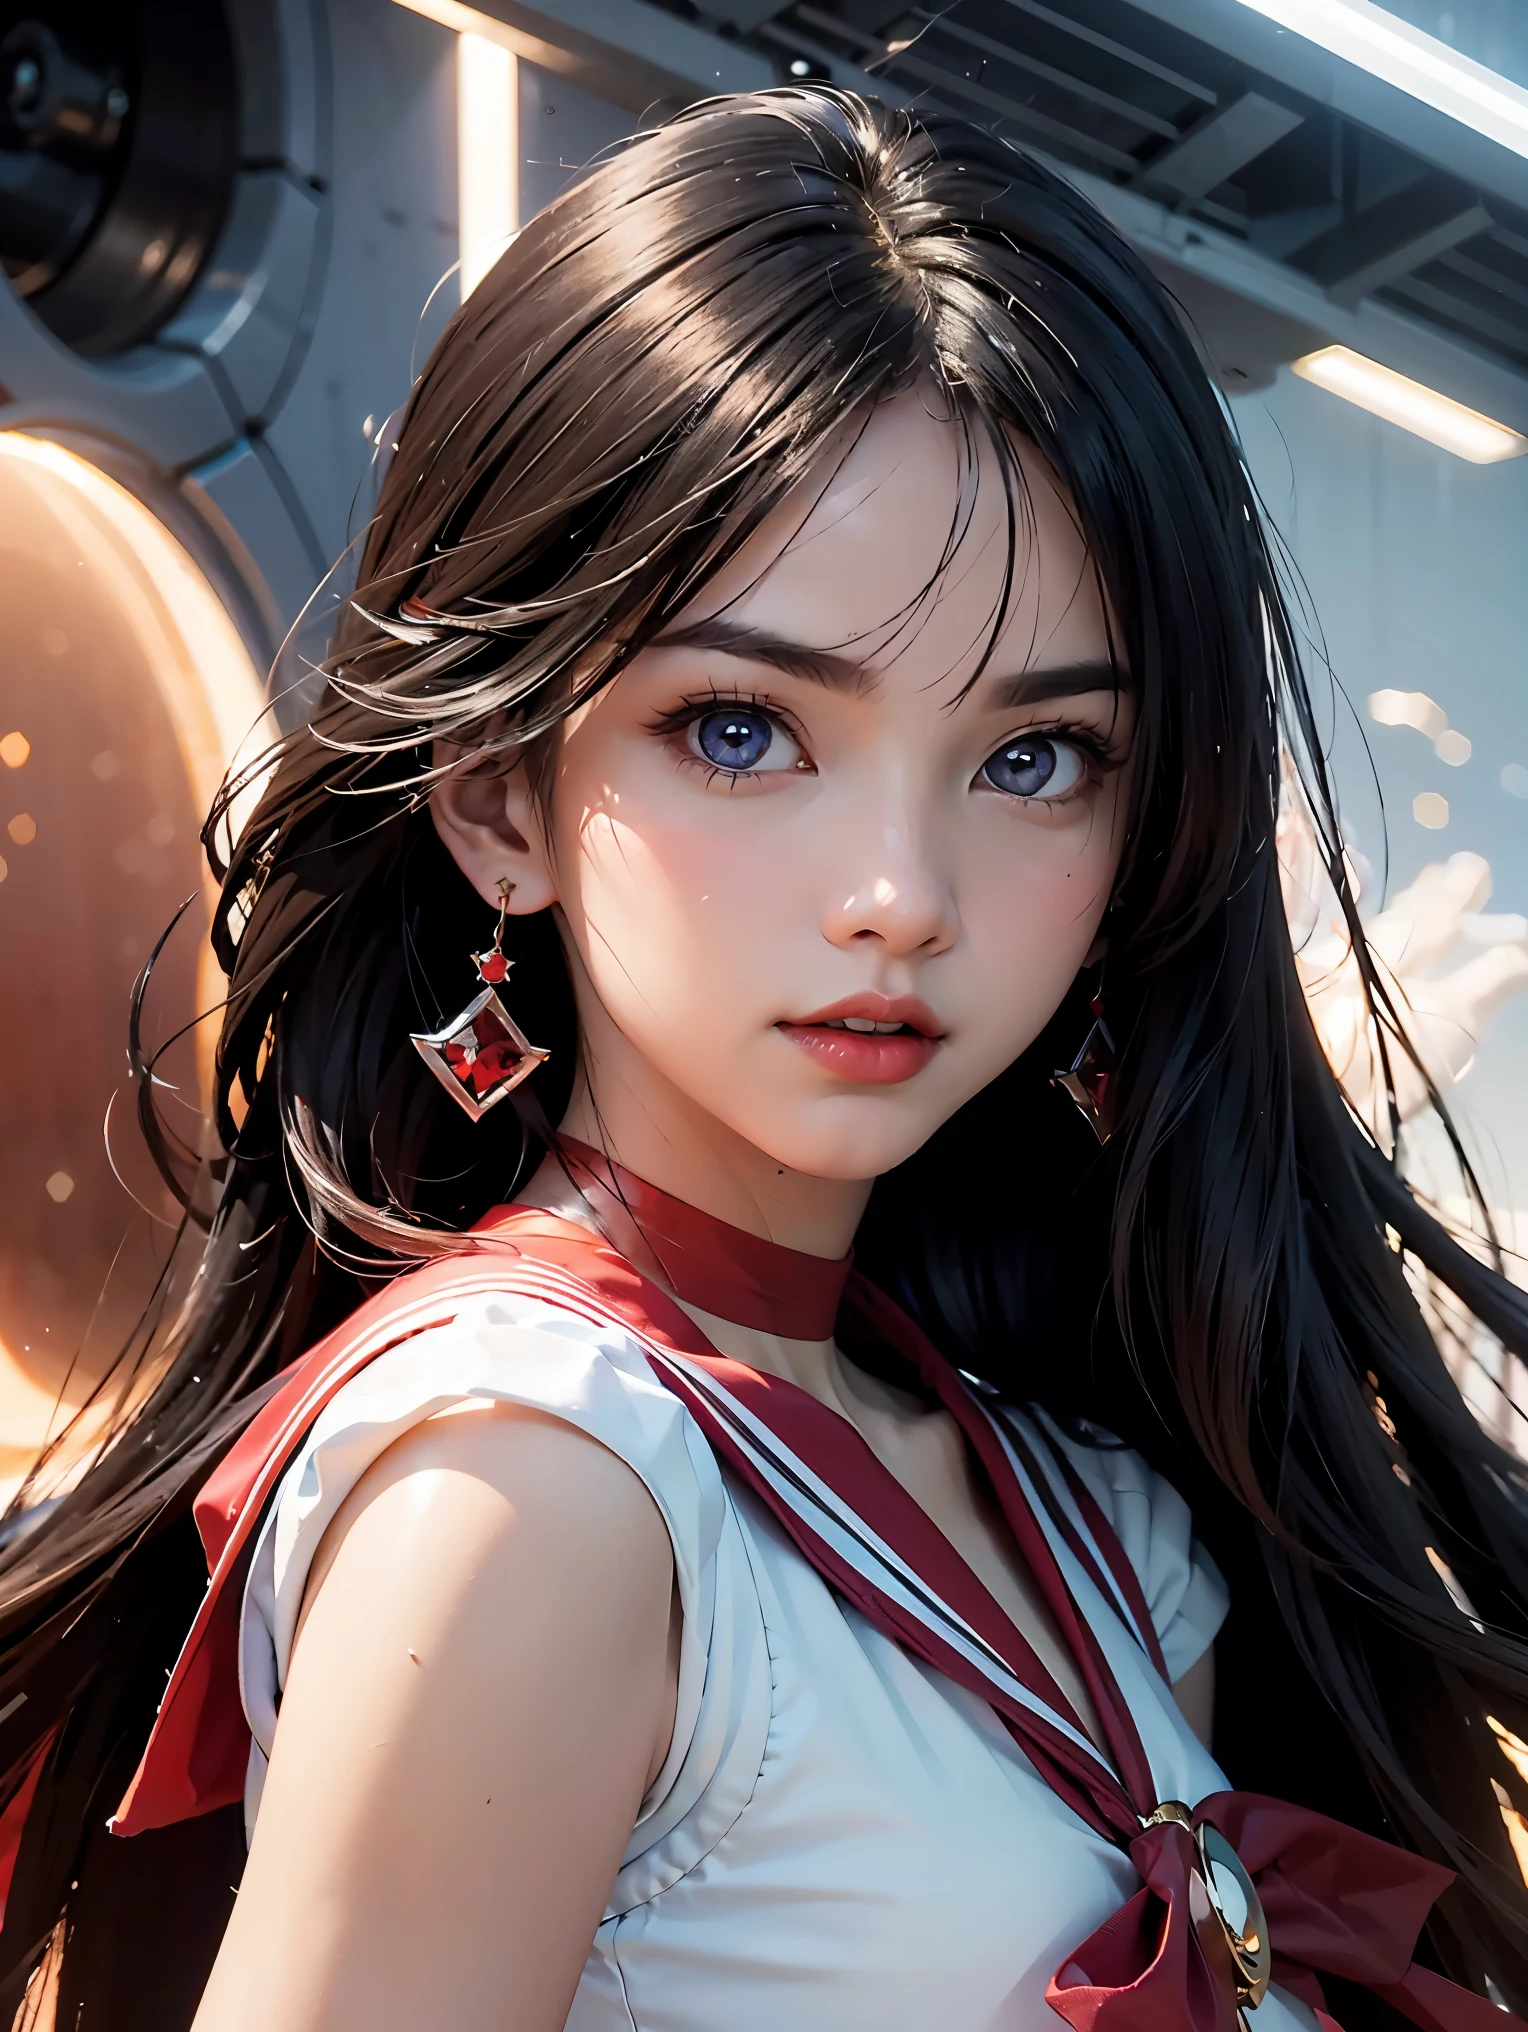 (HD Real, SAMA1 level)), Extreme Real, Masterpiece, Best Quality, High Definition, SAMA1, Space, Stunning Beauty, Upper Body Shot, 1 Girl, Chest, Gloves, Lips, Solo, Sailor Mars, Purple Eyes, Uniform, mer1, Tiara, Sailor Senshi Uniform, (RAW photo, highest quality), Masterpiece, Floating black long hair, Red Sailor Color, Bow, choker, white gloves, red choker, elbow gloves, jewelry, earrings, red skirt, sole, full body, black hair, (perfect hands): 3.8, octane rendering, Martian goddess, (Close-up: 1.2) Finely detailed beautiful eyes, close-up, small eyes, look viewer, to8contrast style, octane line art, space background, Mars, Fire effect, lowered hand, no makeup, strong gaze